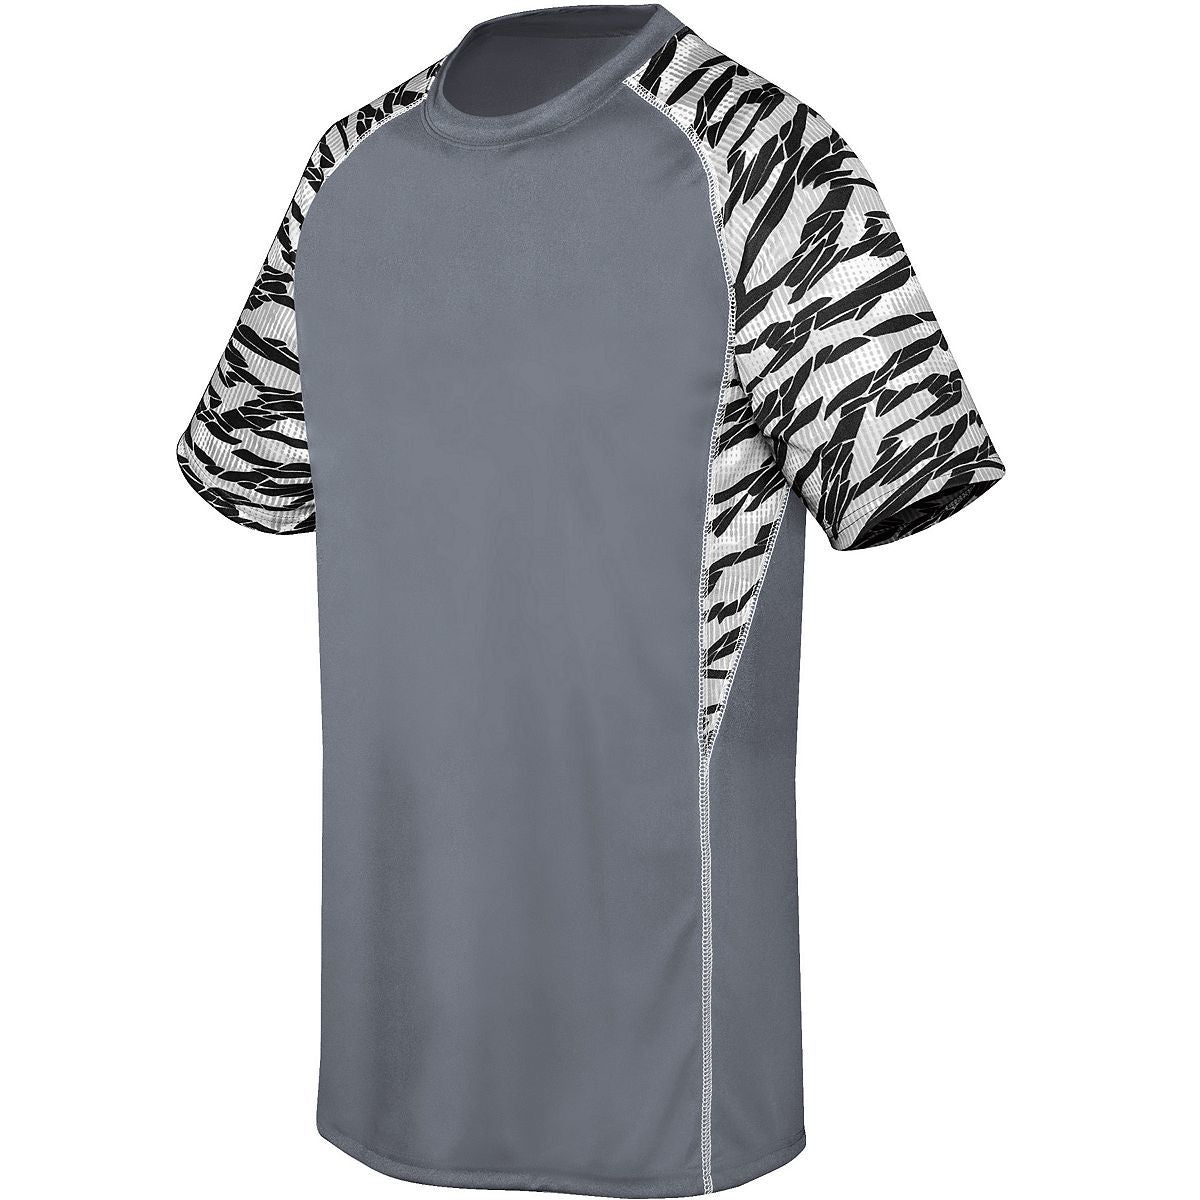 High 5 Evolution Printed Short Sleeve Jersey in Graphite/Fragment Print/White  -Part of the Adult, Adult-Jersey, High5-Products, Shirts product lines at KanaleyCreations.com